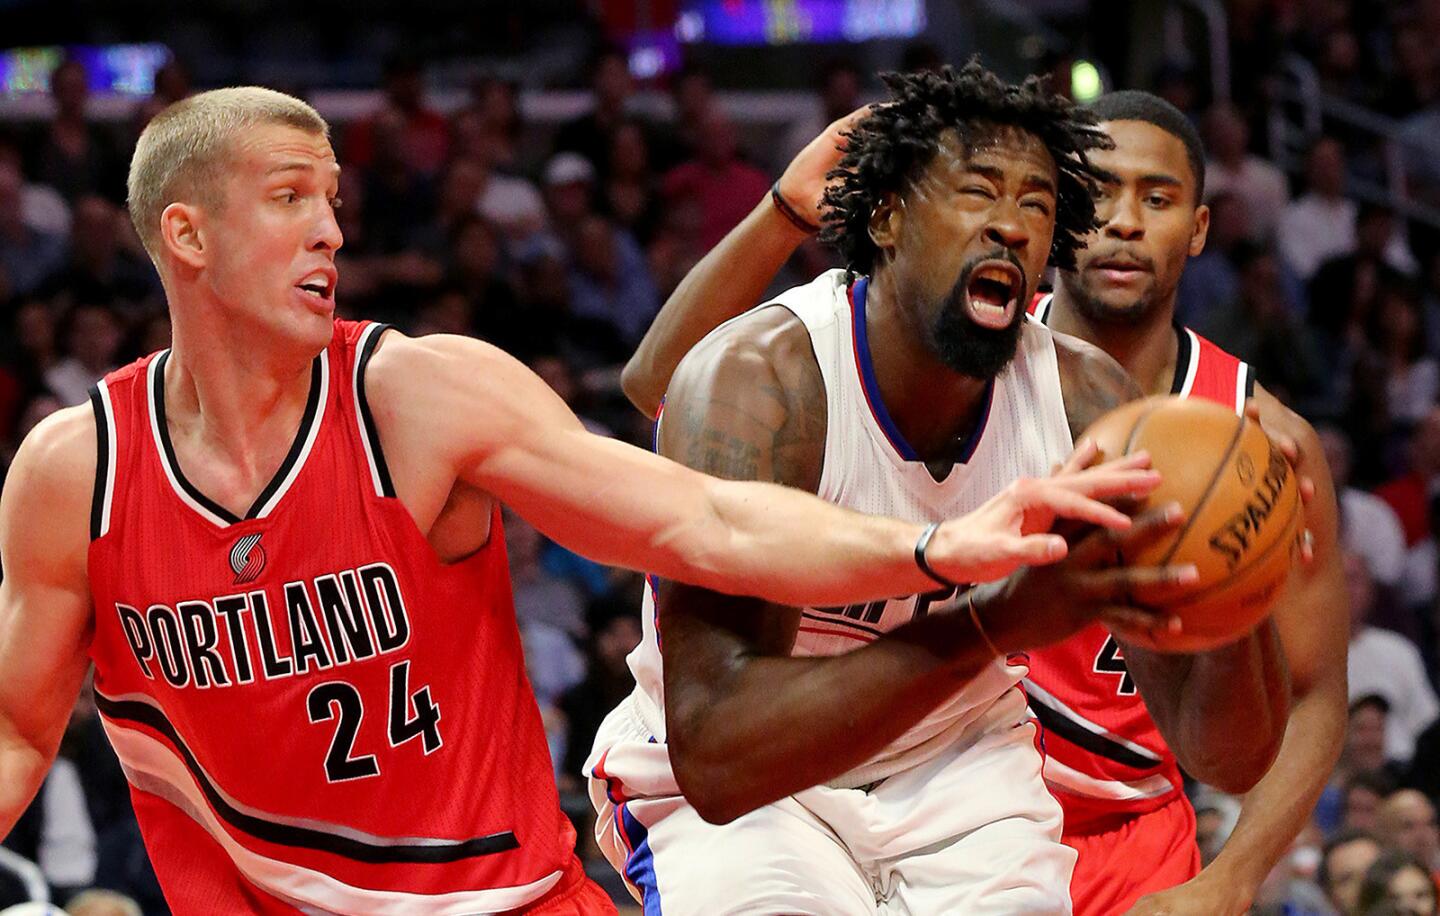 Clippers center DeAndre Jordan is fouled by Trail Blazers big man Mason Plumlee in the second quarter on Wednesday.